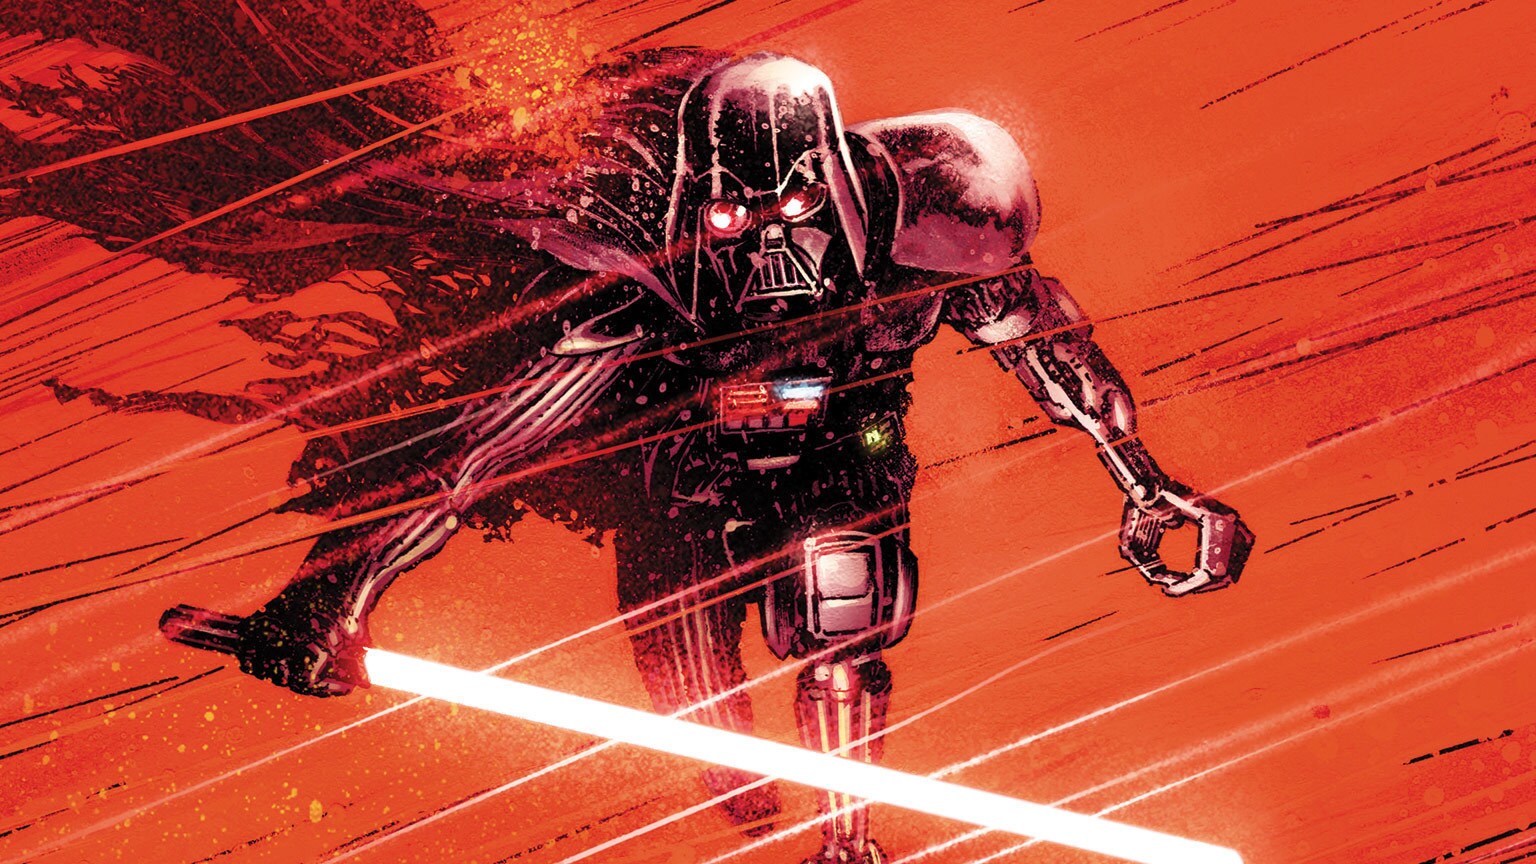 It’s Vader Vs. the Empire in Marvel’s Darth Vader #10 - Exclusive Preview